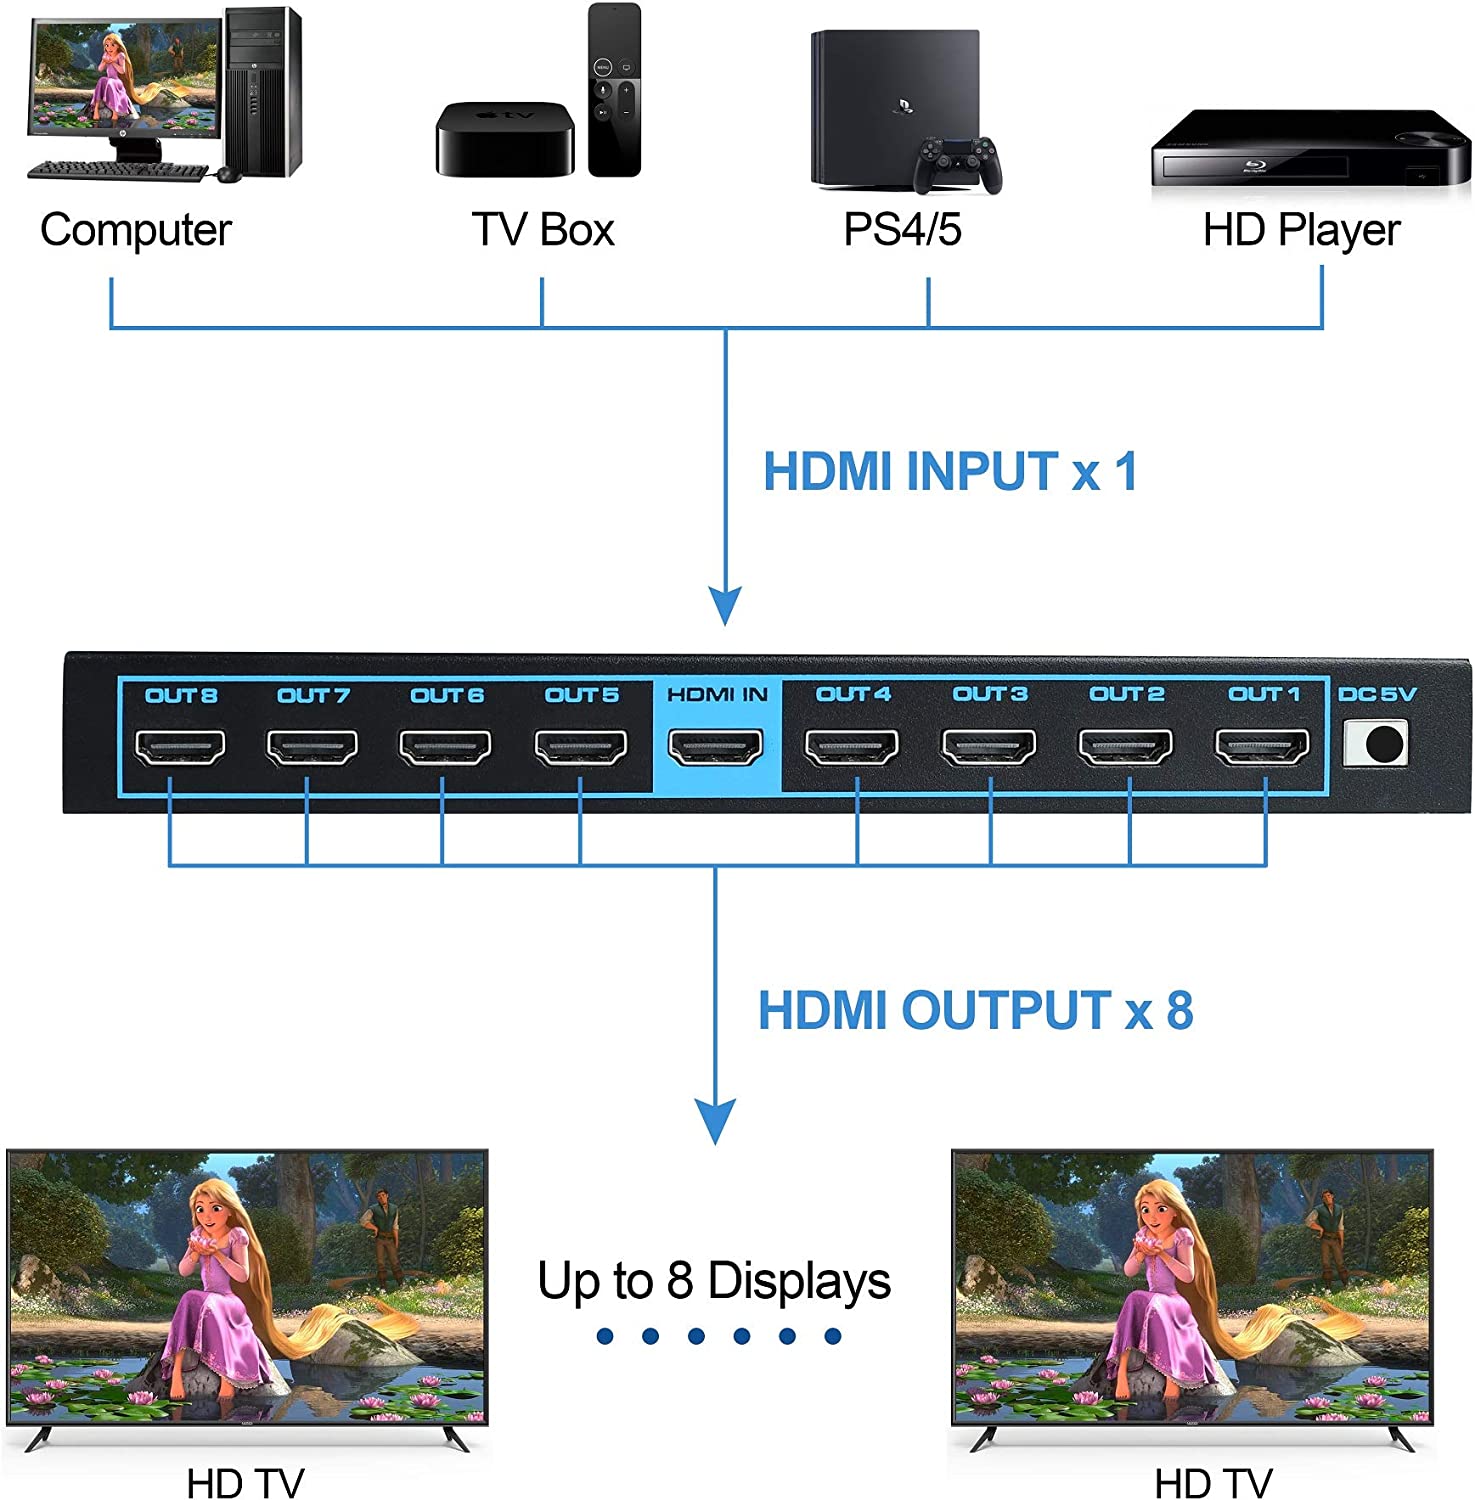 1x8 HDMI Splitter with EDID, avedio links 4K@60Hz HDMI2.0b Splitter 1 in 8 Out Audio Video Distributor Box with Power Adapter, Support 3D HDCP2.2, RGB8-8-8